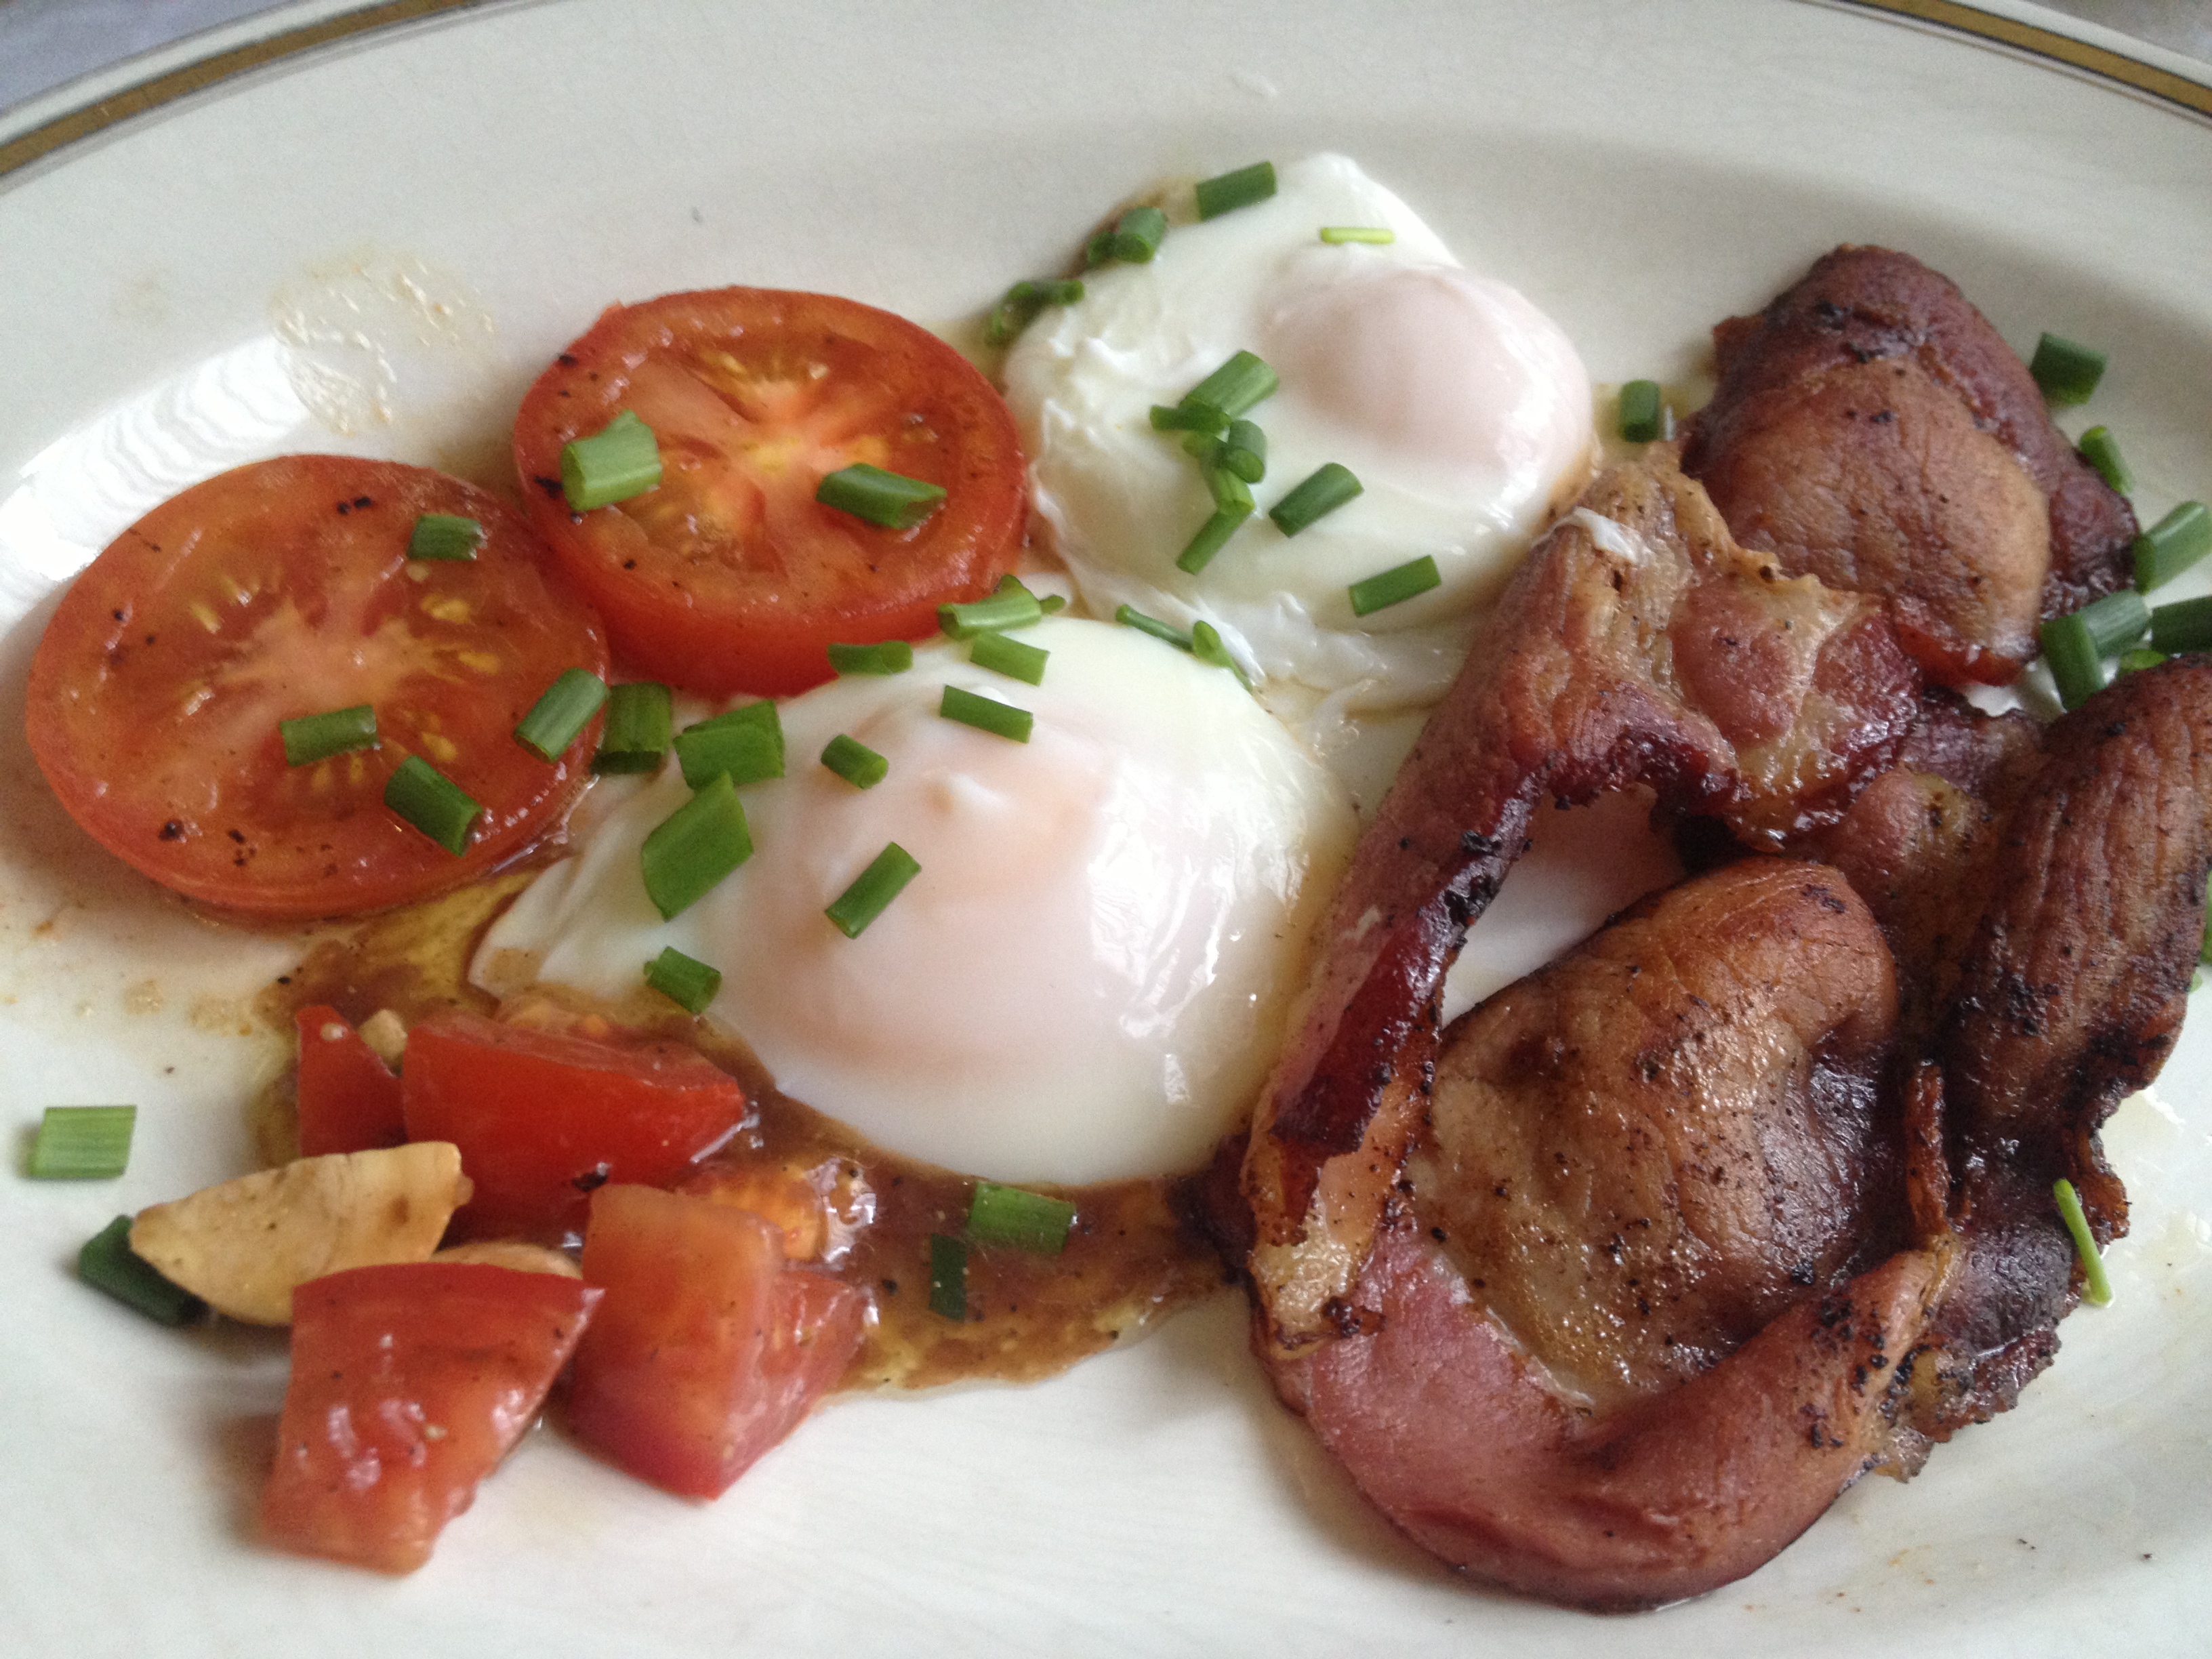 Gently Poached Eggs and Bacon